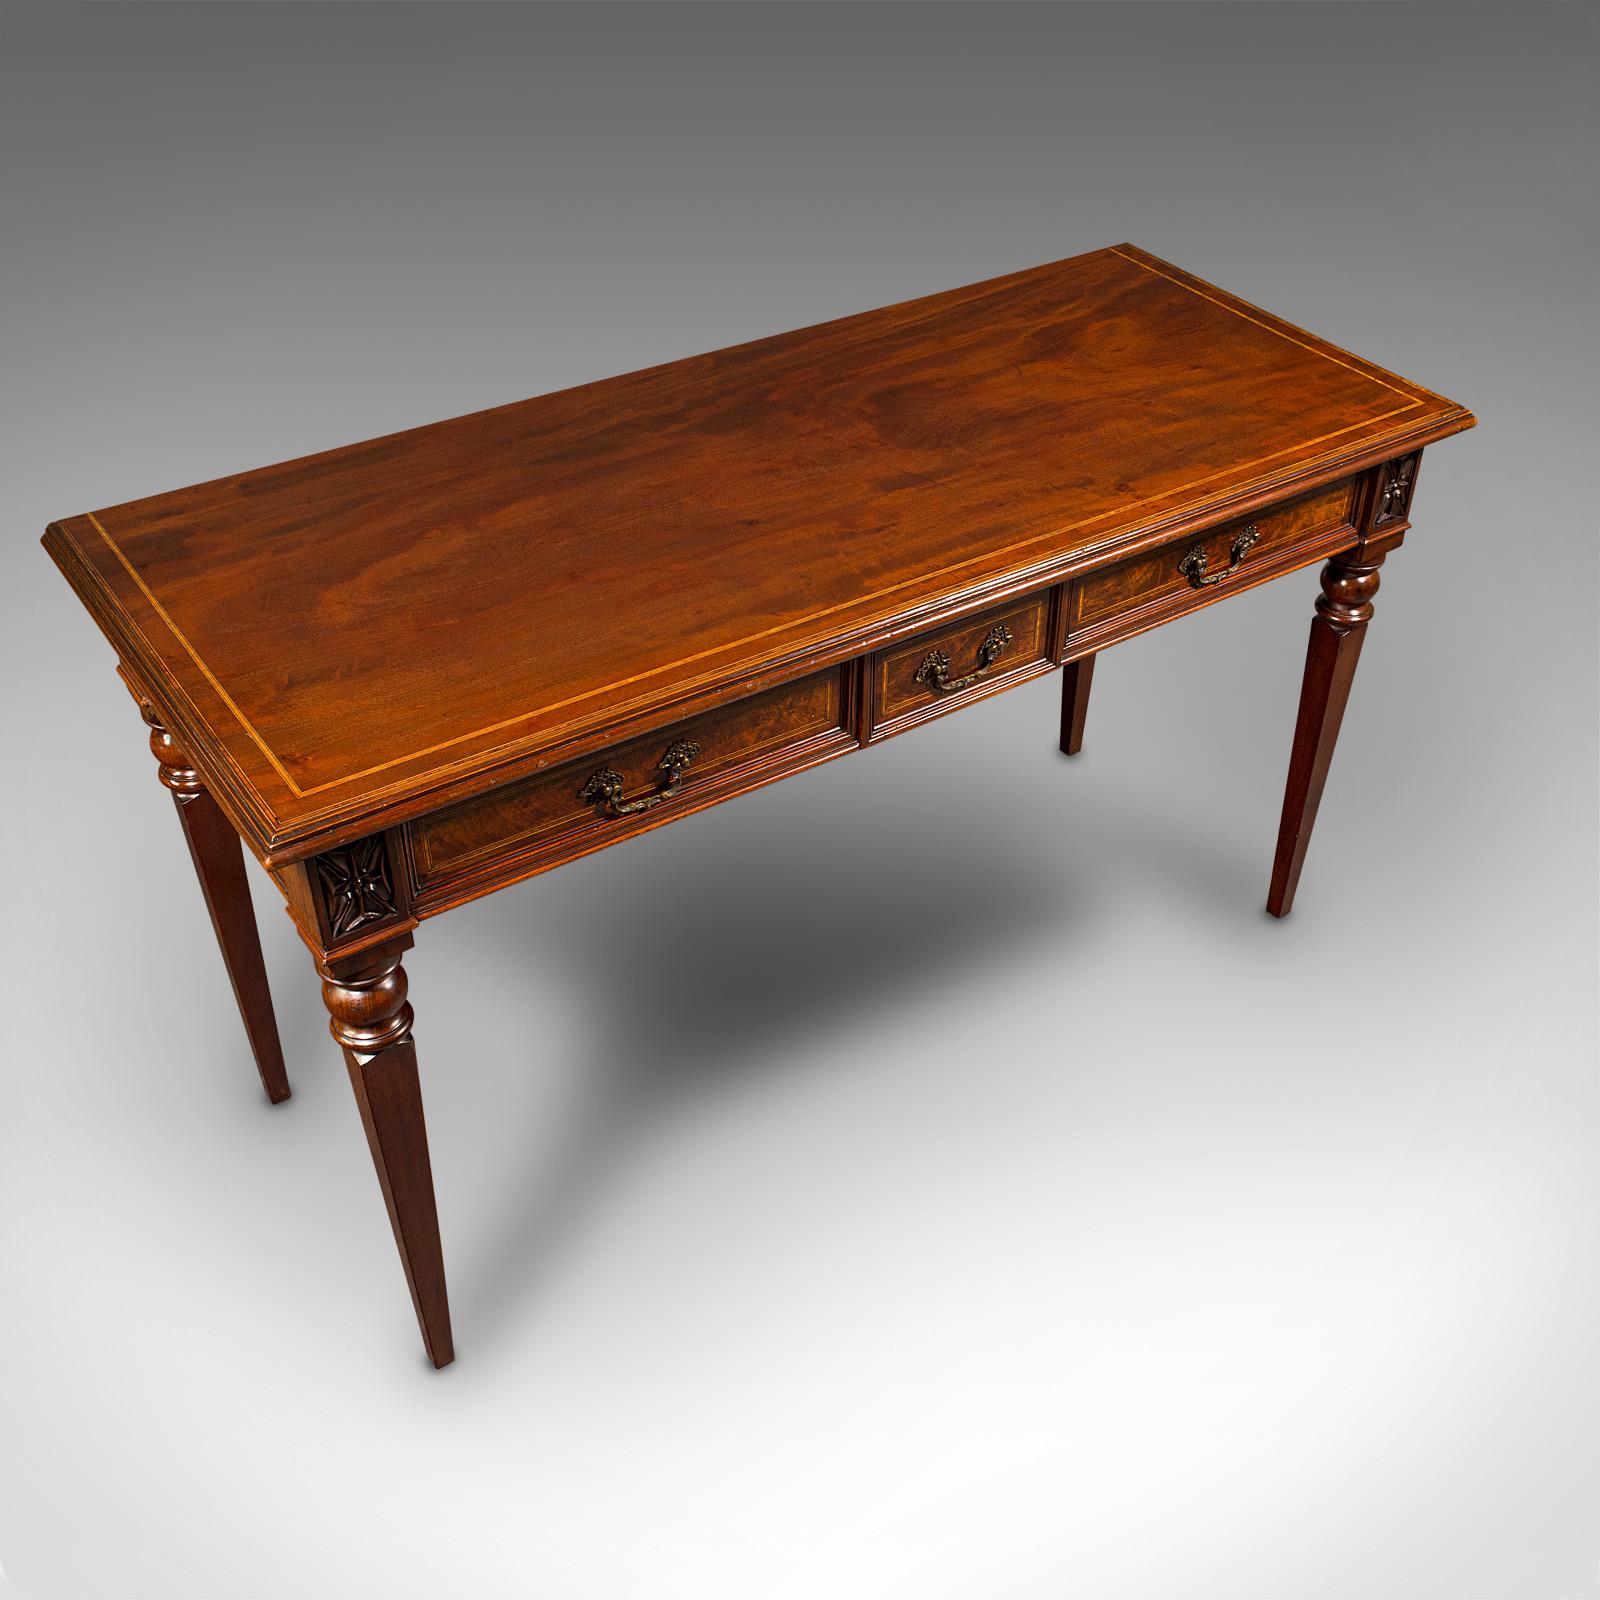 Wood Antique Writer's Desk, English, Inlay, Side, Serving Table, Georgian, C.1800 For Sale